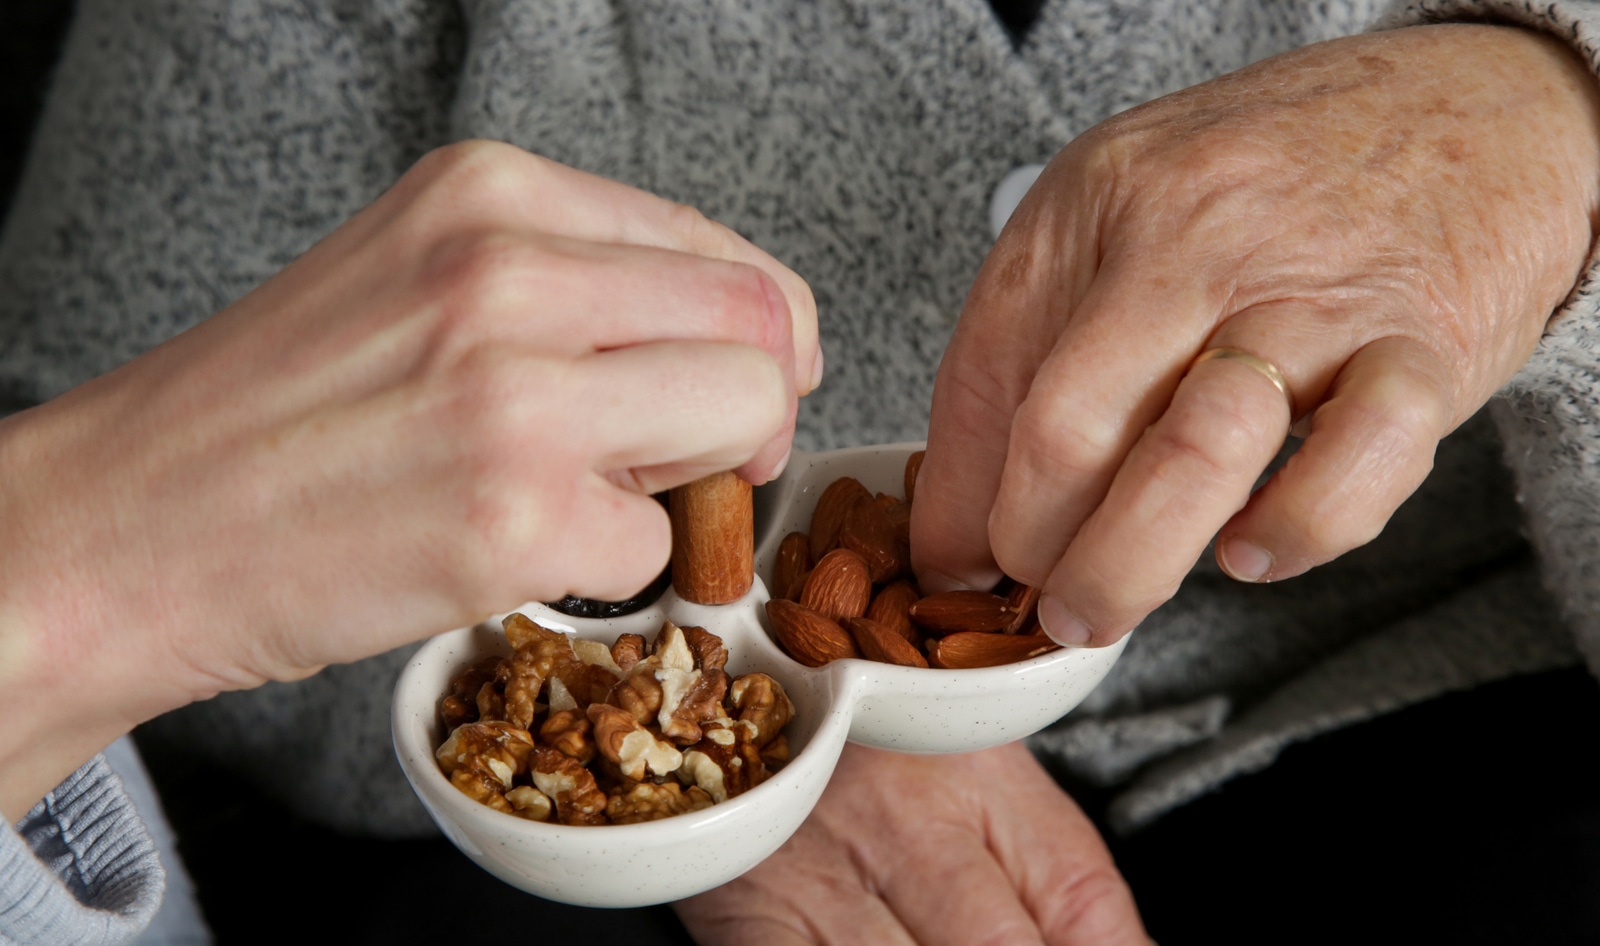 A Plant-Based Diet High In Nuts Lowers Parkinson's Risk by 31 Percent, Study Finds